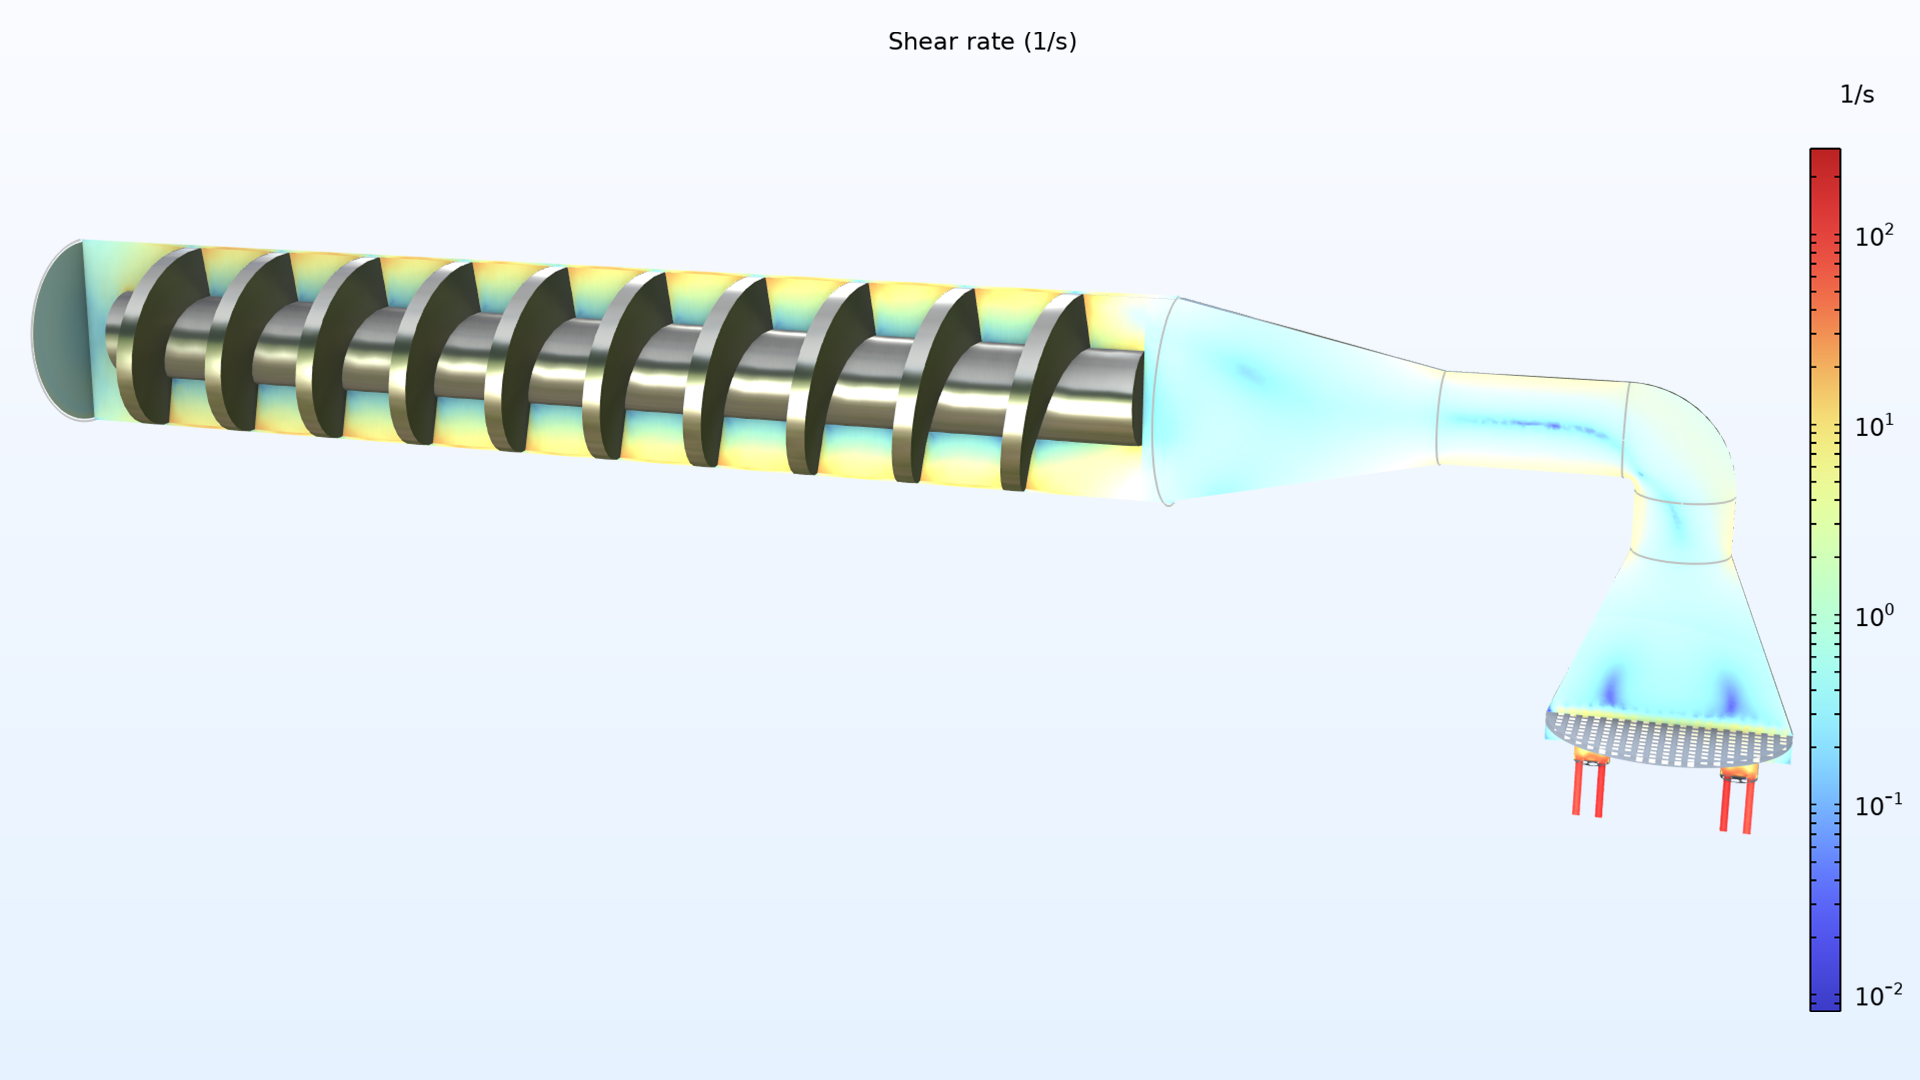 A pasta extruder model showing the shear rate in rainbow, where the end of the model is dark green; the middle is yellow, green, and blue; and the nozzle is primarily a light, near-transparent blue.